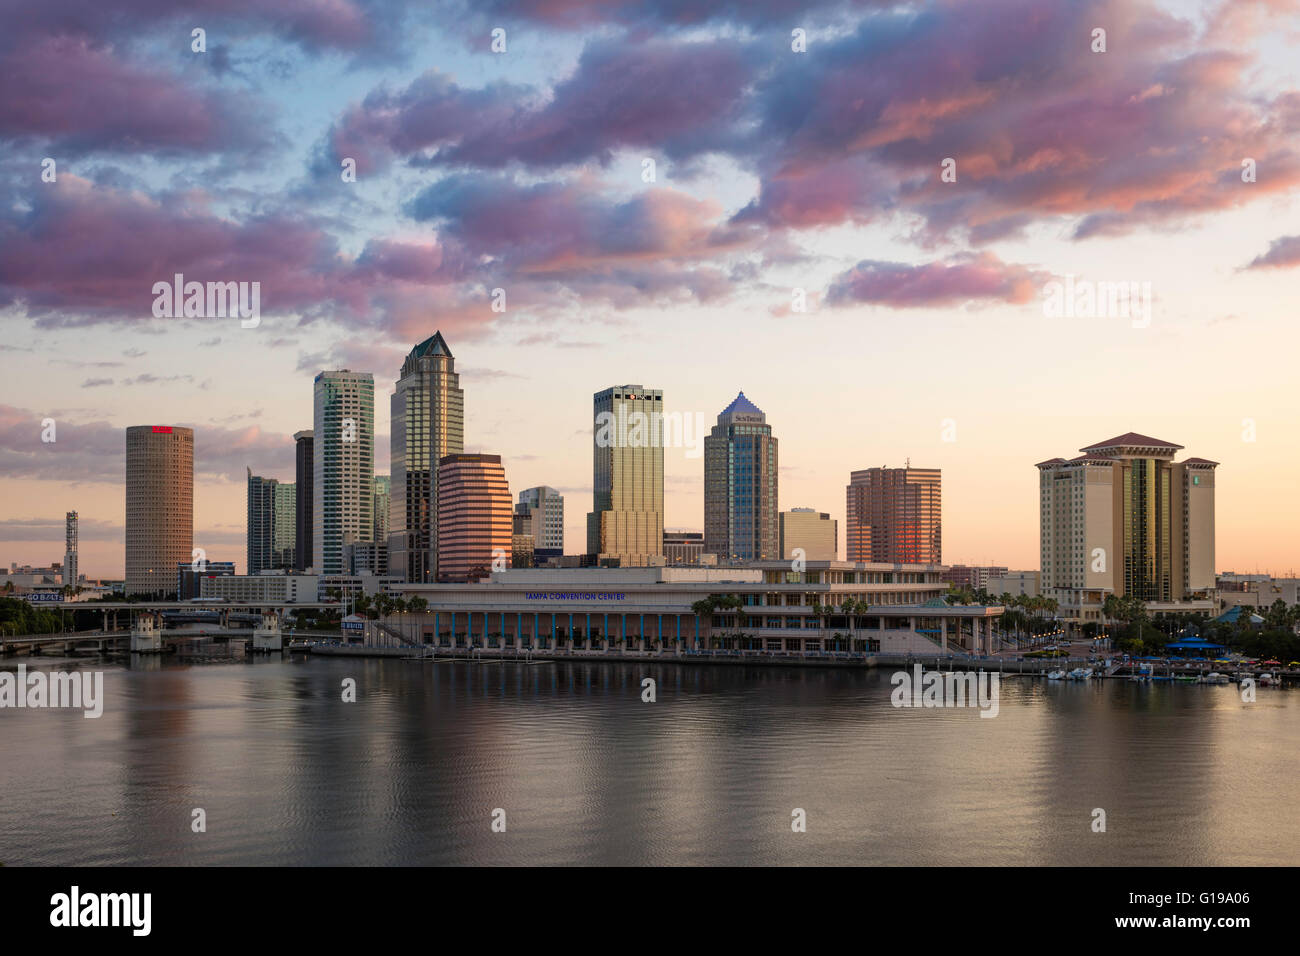 Just prior to dawn over the skyline of Tampa, Florida, USA Stock Photo